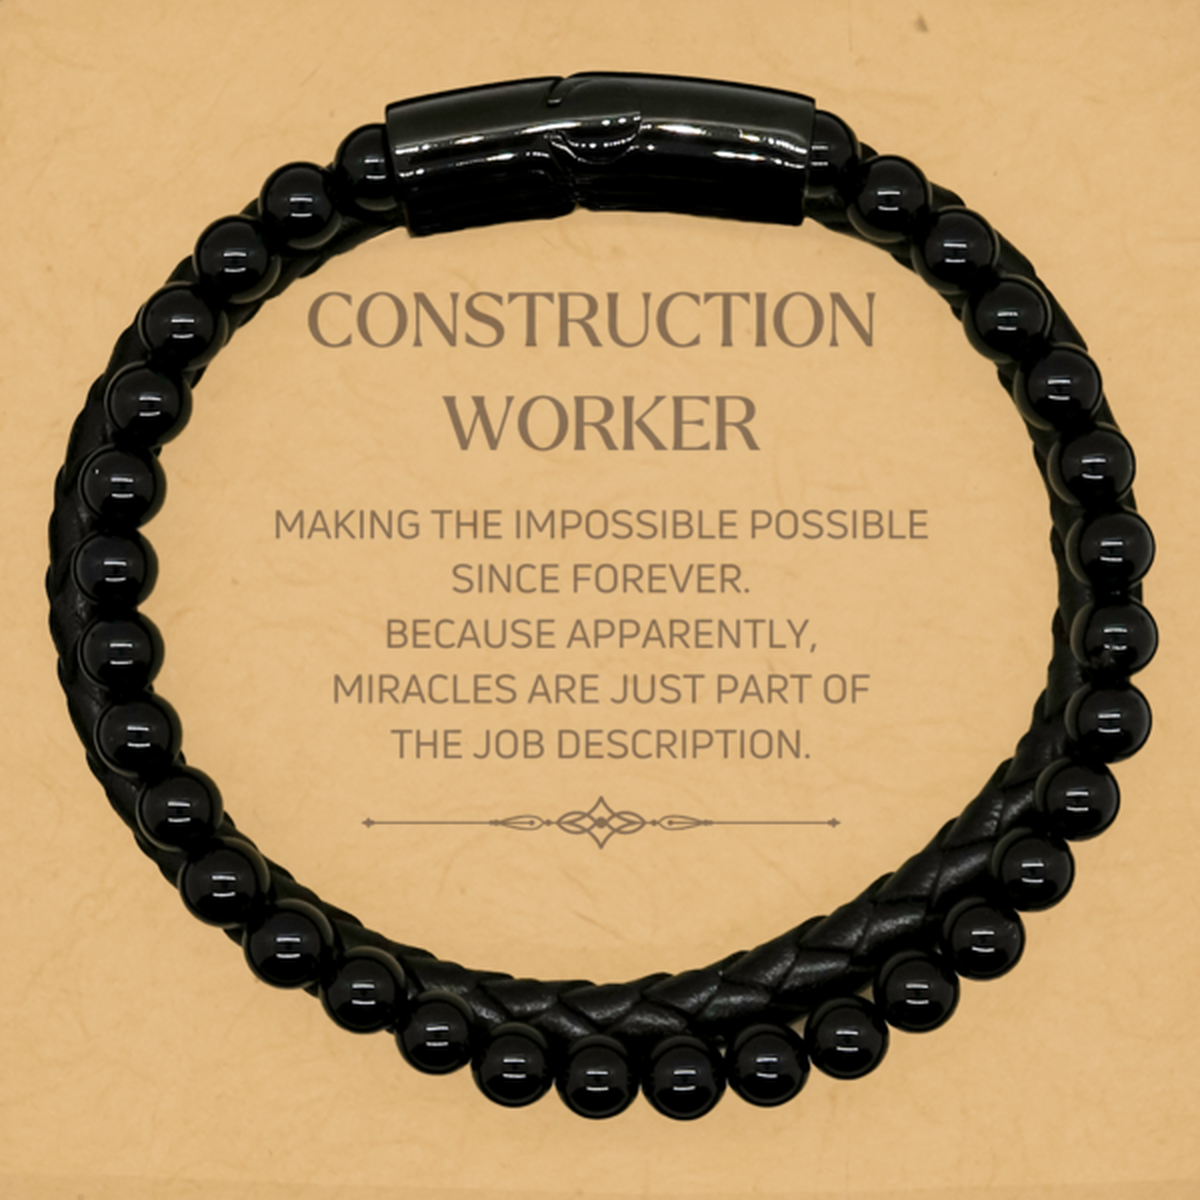 Funny Construction Worker Gifts, Miracles are just part of the job description, Inspirational Birthday Stone Leather Bracelets For Construction Worker, Men, Women, Coworkers, Friends, Boss